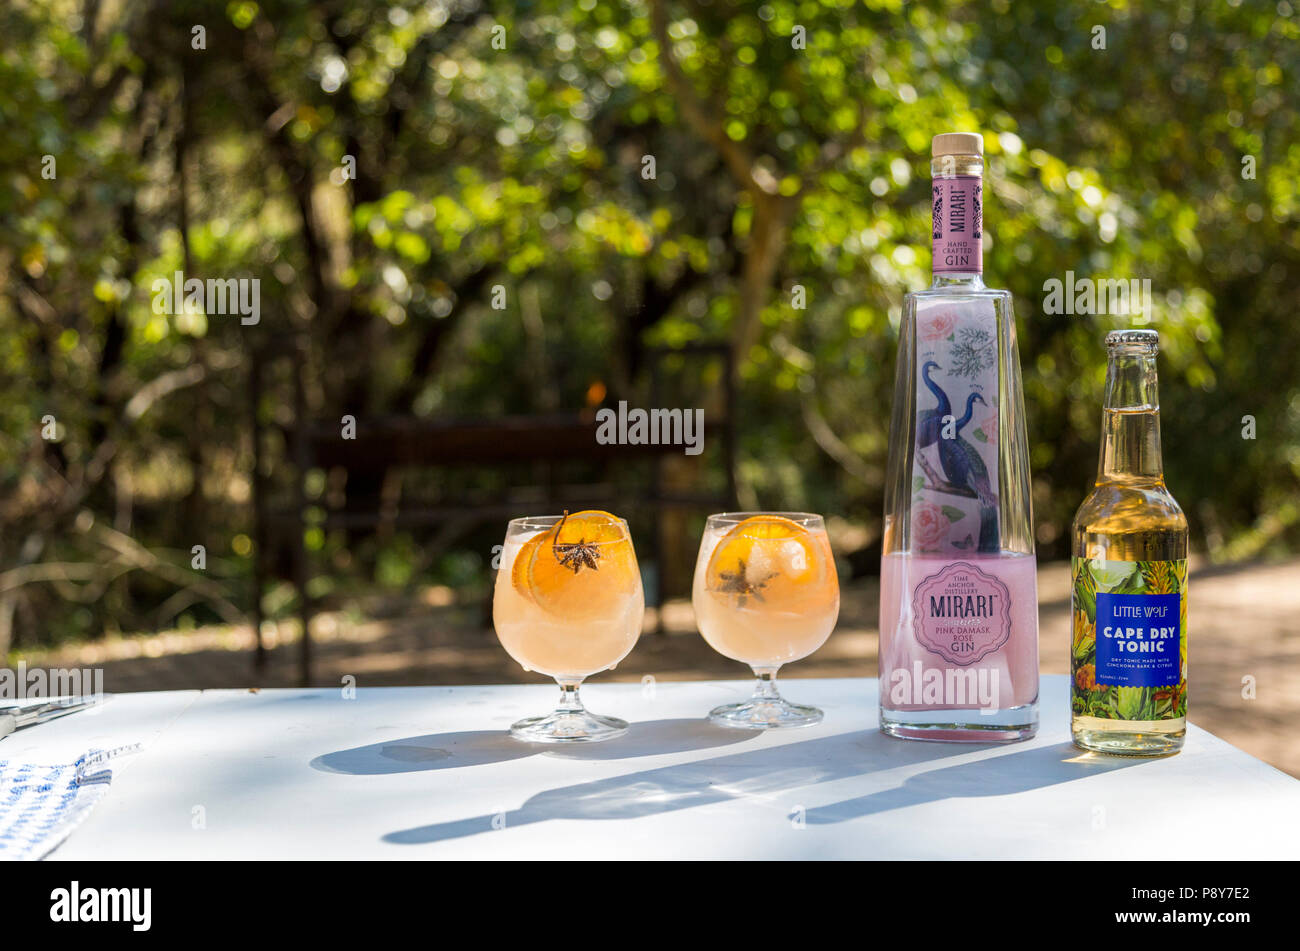 Gin and tonic standing on an outdoor table Stock Photo